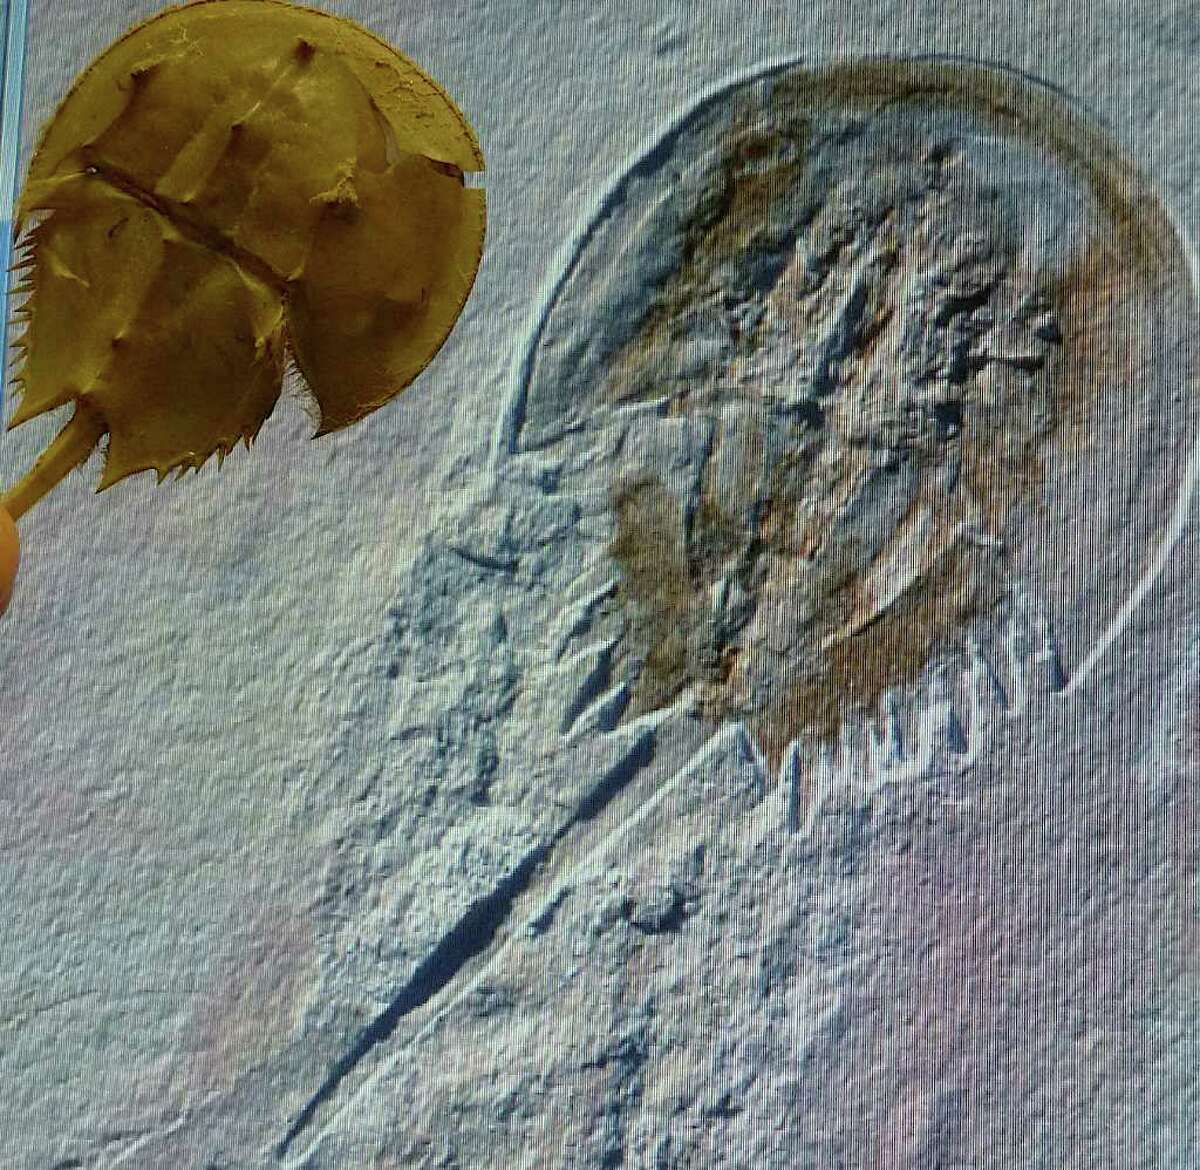 Modern-day horseshoe crab shell, left, appears largely unchanged from that of a horseshoe crab fossil from the Jurassic Period -- although nearly 245 million years separates them. (Fossil image courtesy of Peabody Museum's Derek Briggs.)